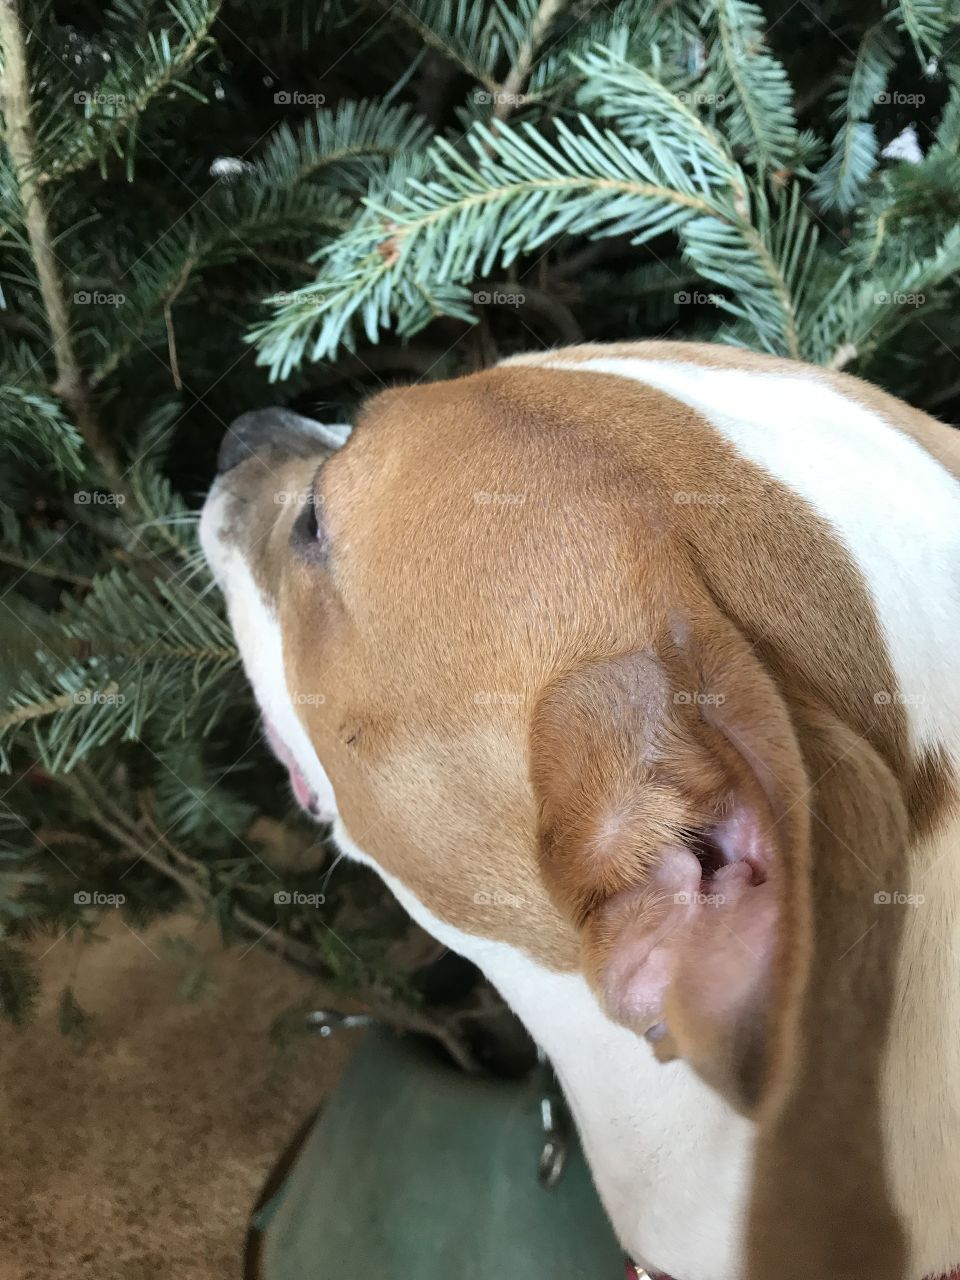 Pit-bulls and Christmas trees; not a good combo.